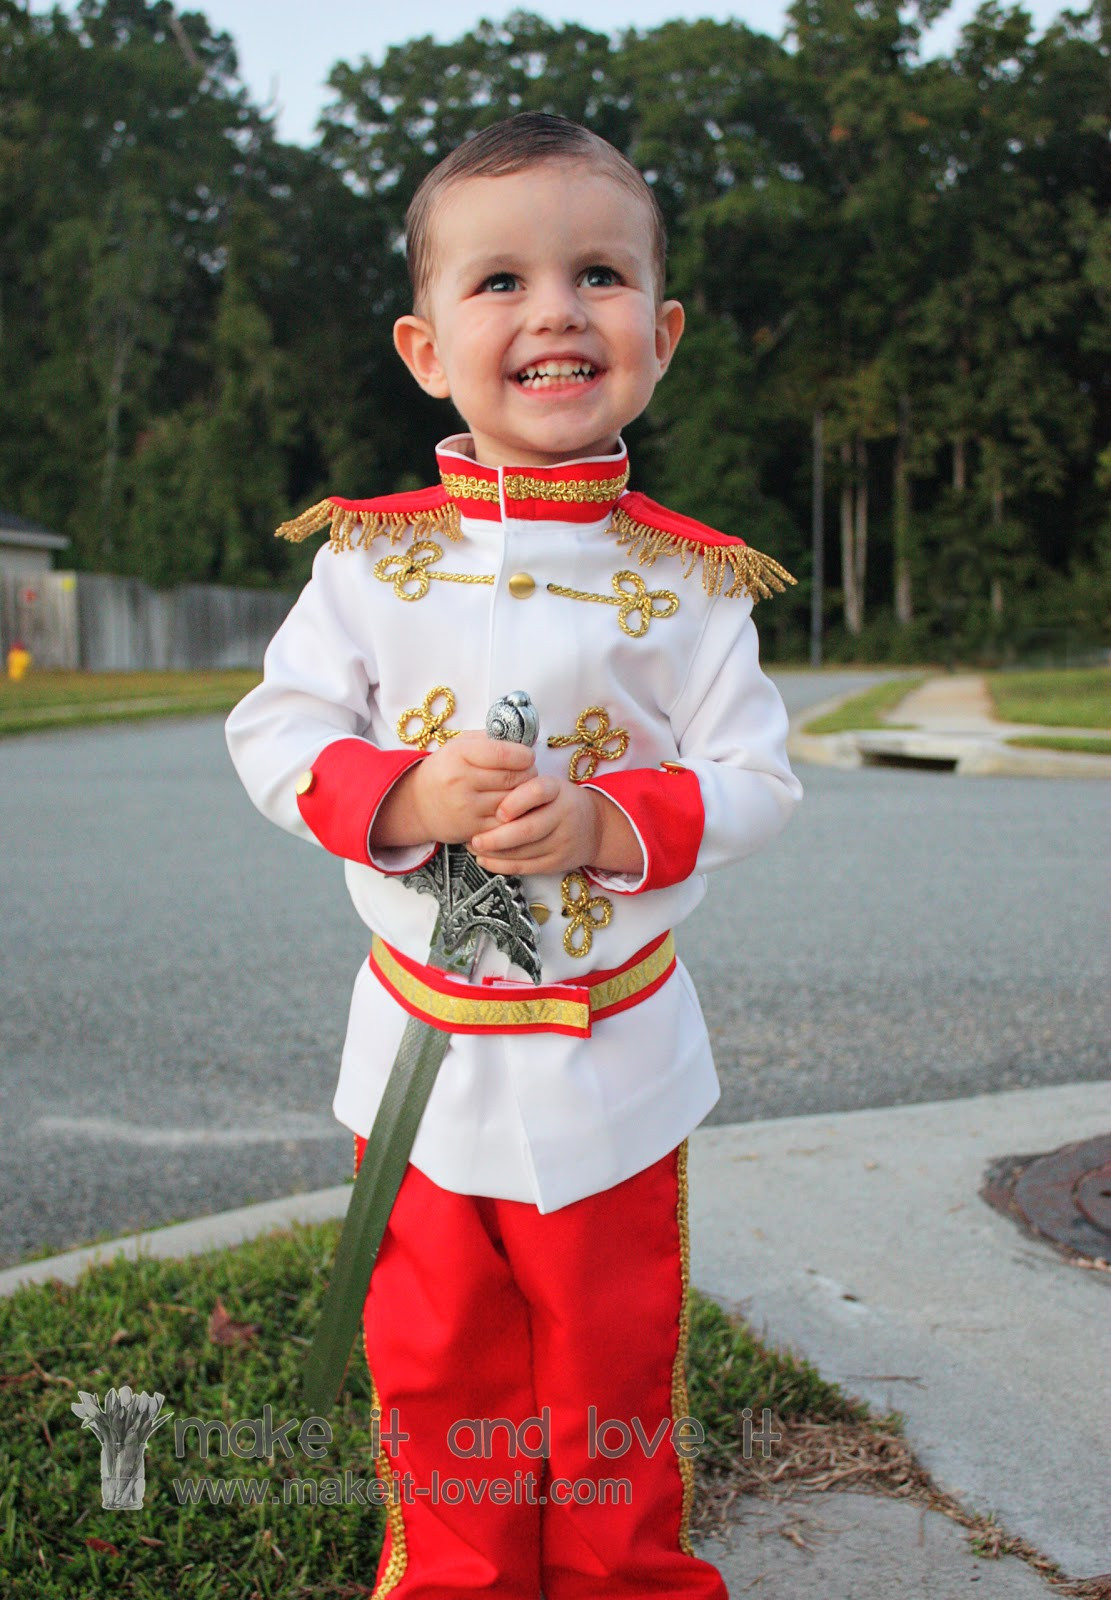 DIY Halloween Costumes For Toddler Boys
 Prince Charming Costume Tutorial from Cinderella